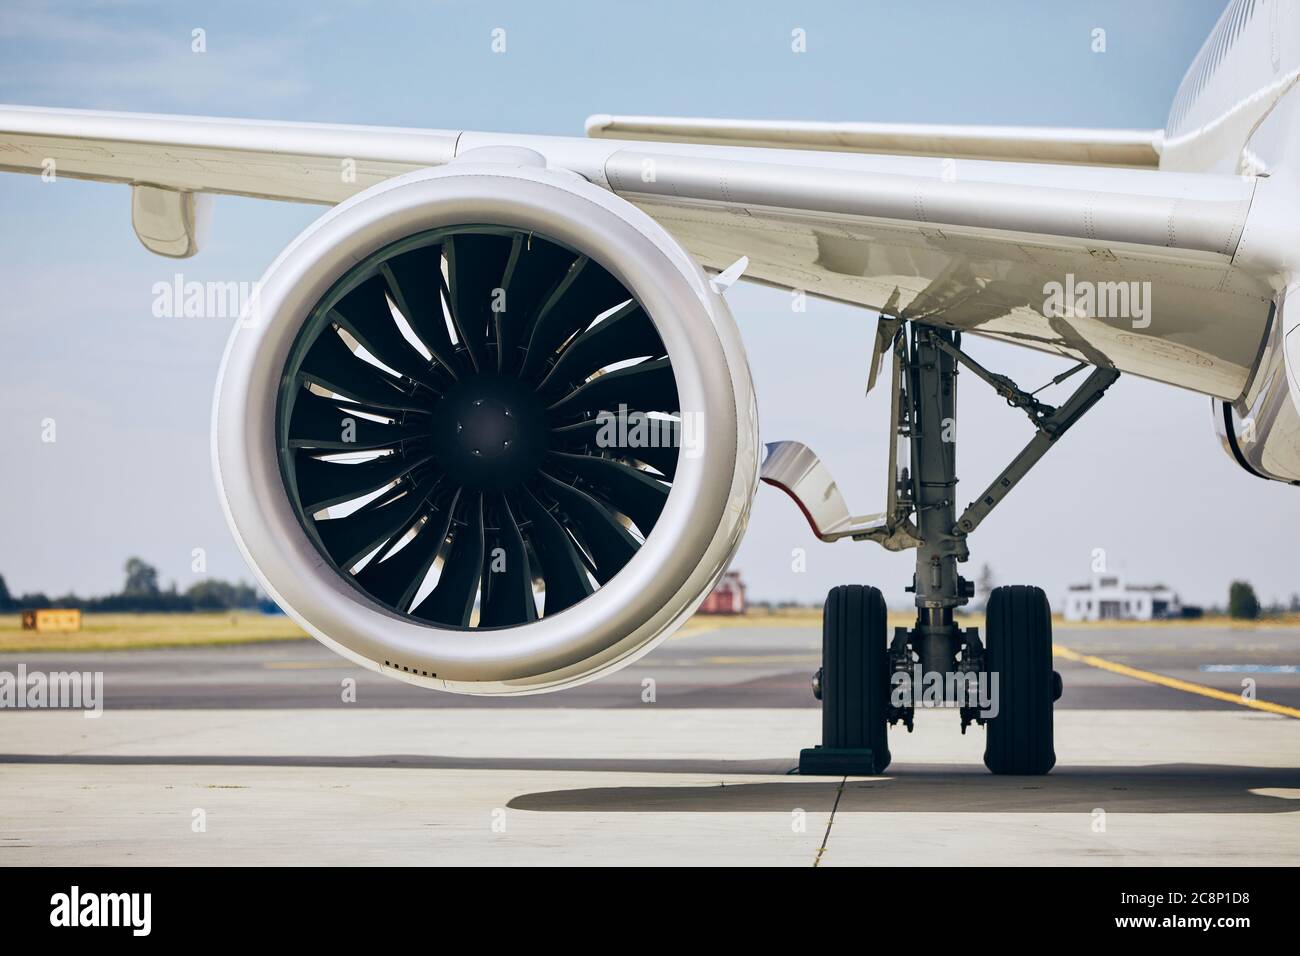 Jet engine of commercial airplane at airport during sunny day. Themes modern technology, power and travel. Stock Photo